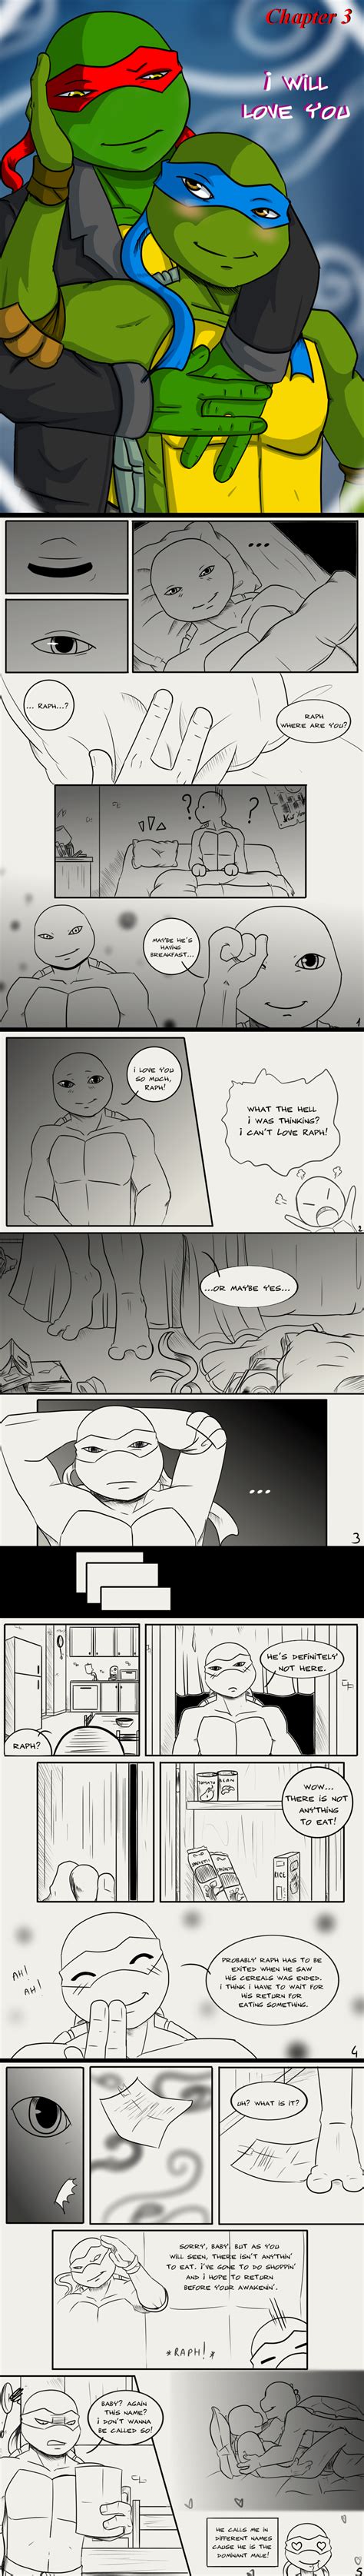 tmnt burning passion chapter 3 page 1 4 by kameboxer on deviantart